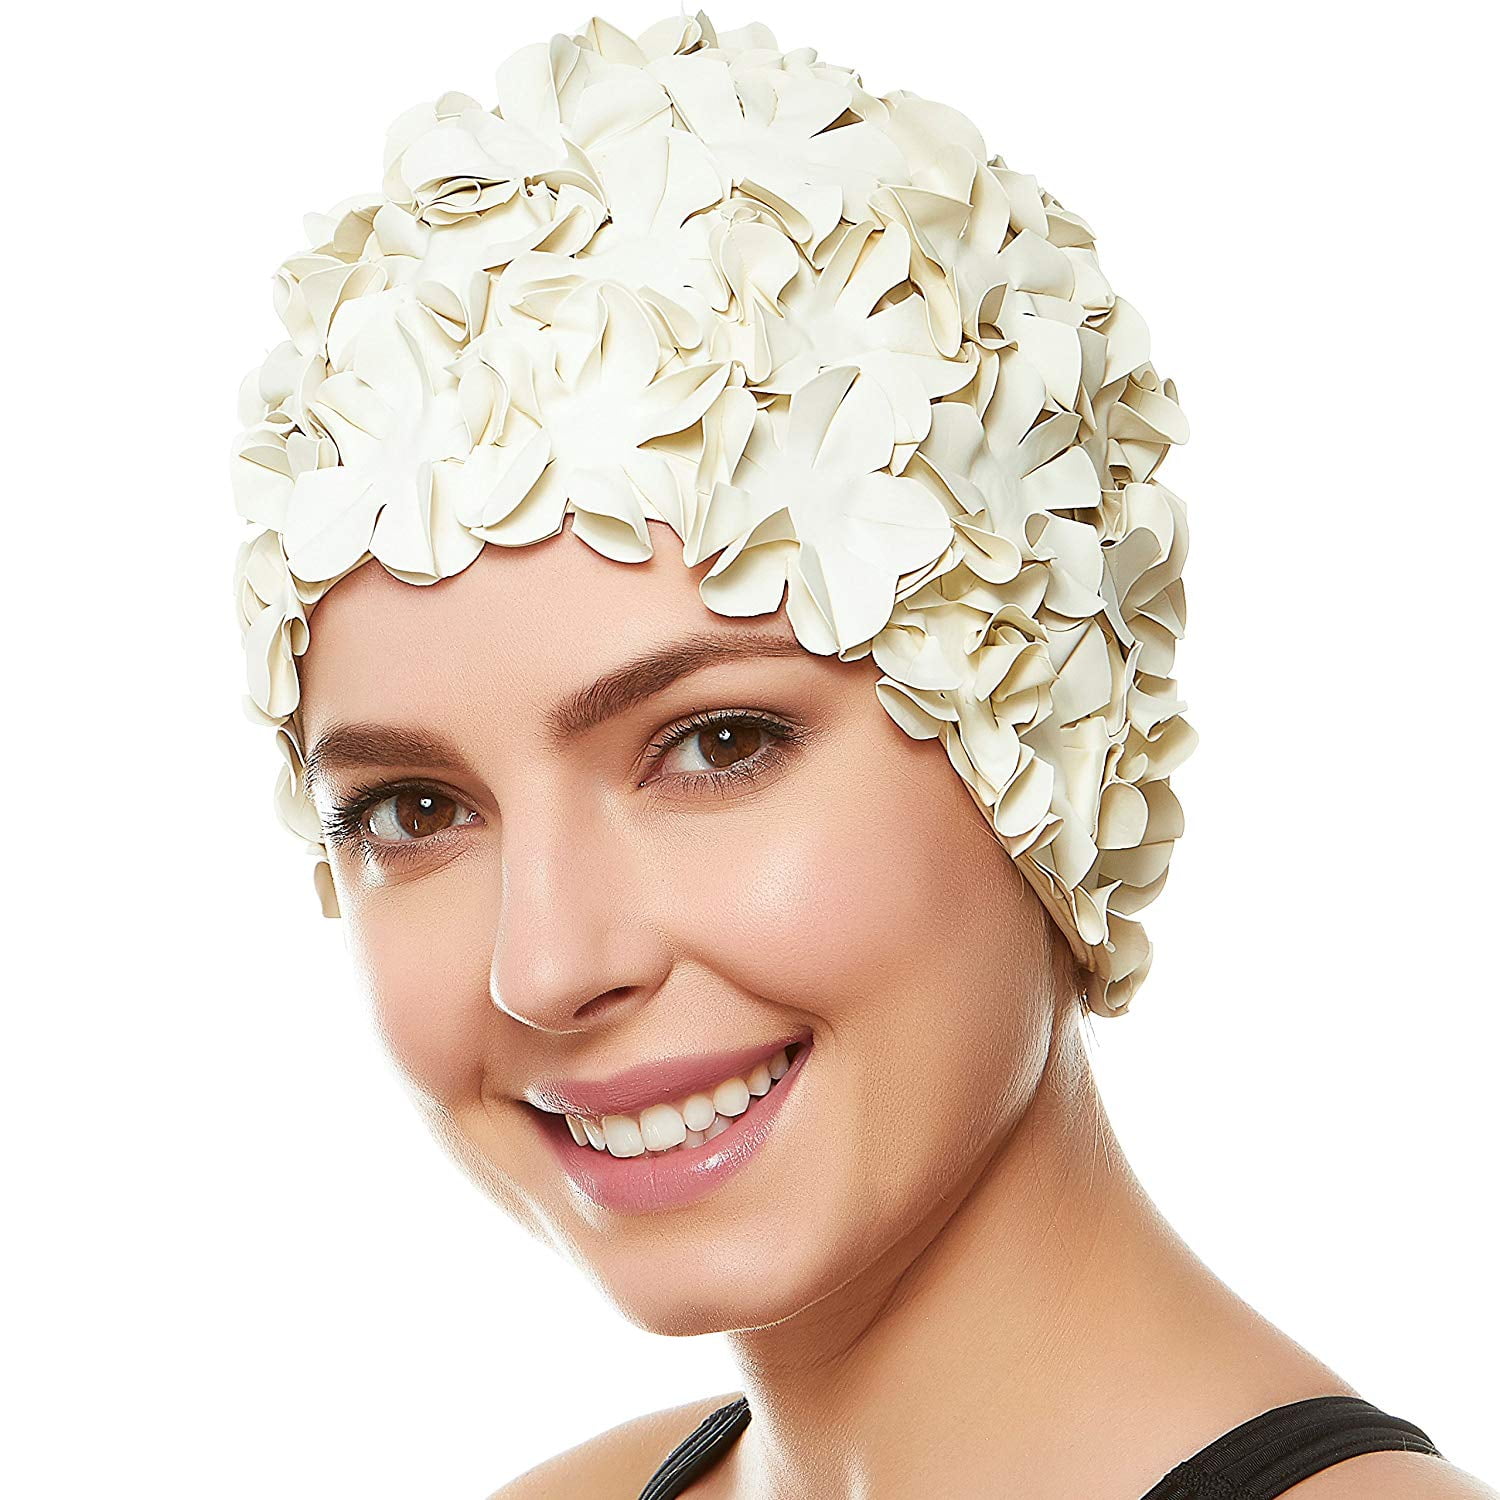 chantale lyons recommends old fashioned bathing caps pic